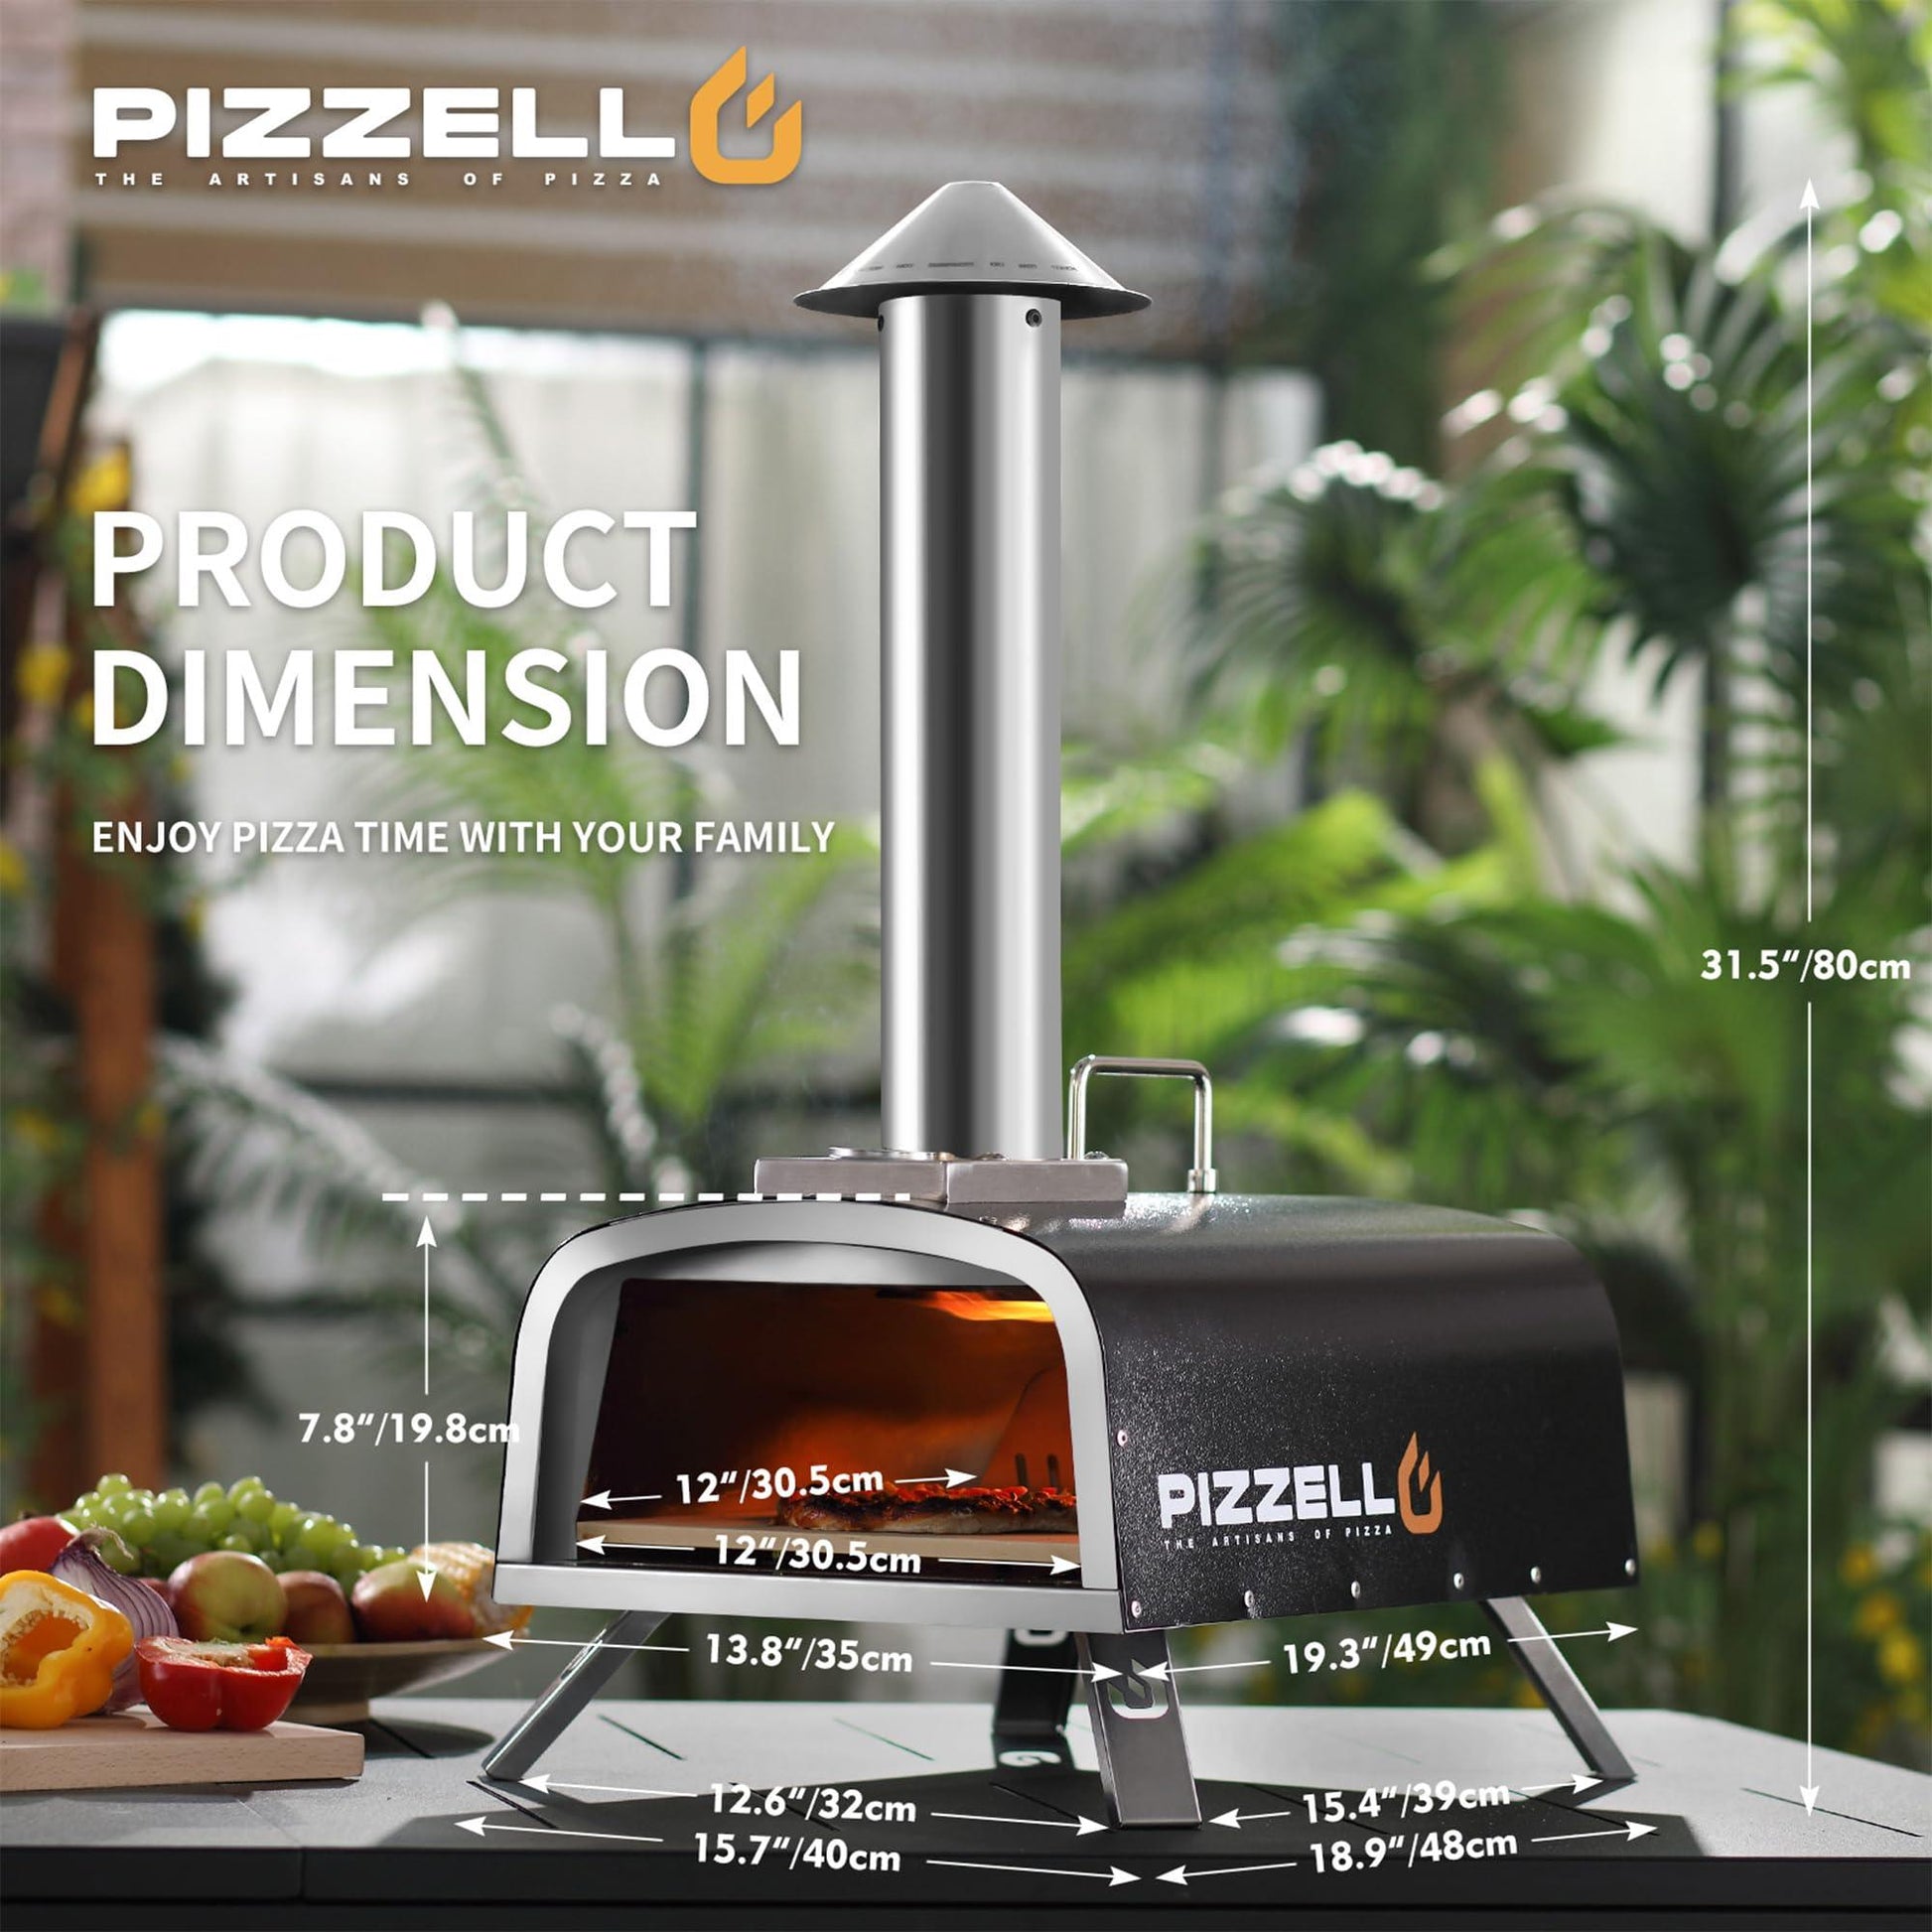 PIZZELLO Portable Pellet Pizza Oven Outdoor Wood Fired Pizza Ovens Included Pizza Stone, Pizza Peel, Fold-up Legs, Cover, Pizzello Forte (Black) - CookCave